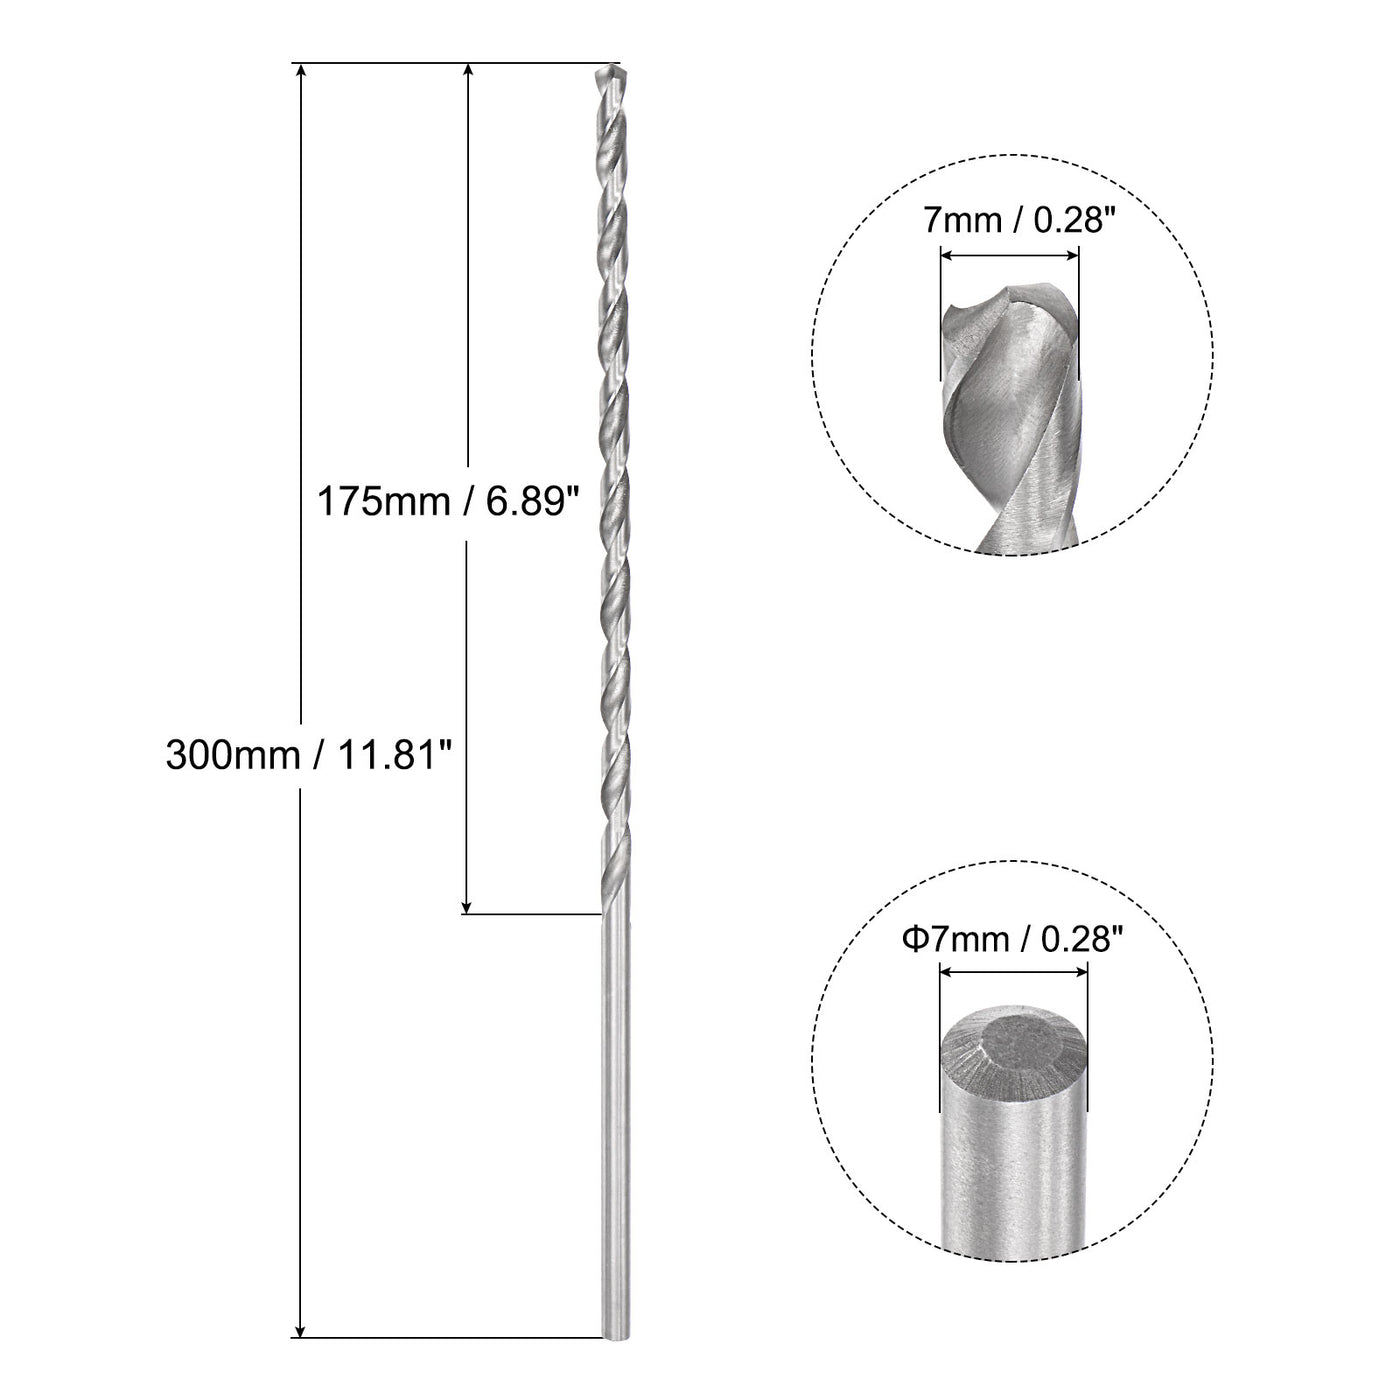 uxcell Uxcell 7mm Twist Drill Bits, High-Speed Steel Extra Long Drill Bit 300mm Length